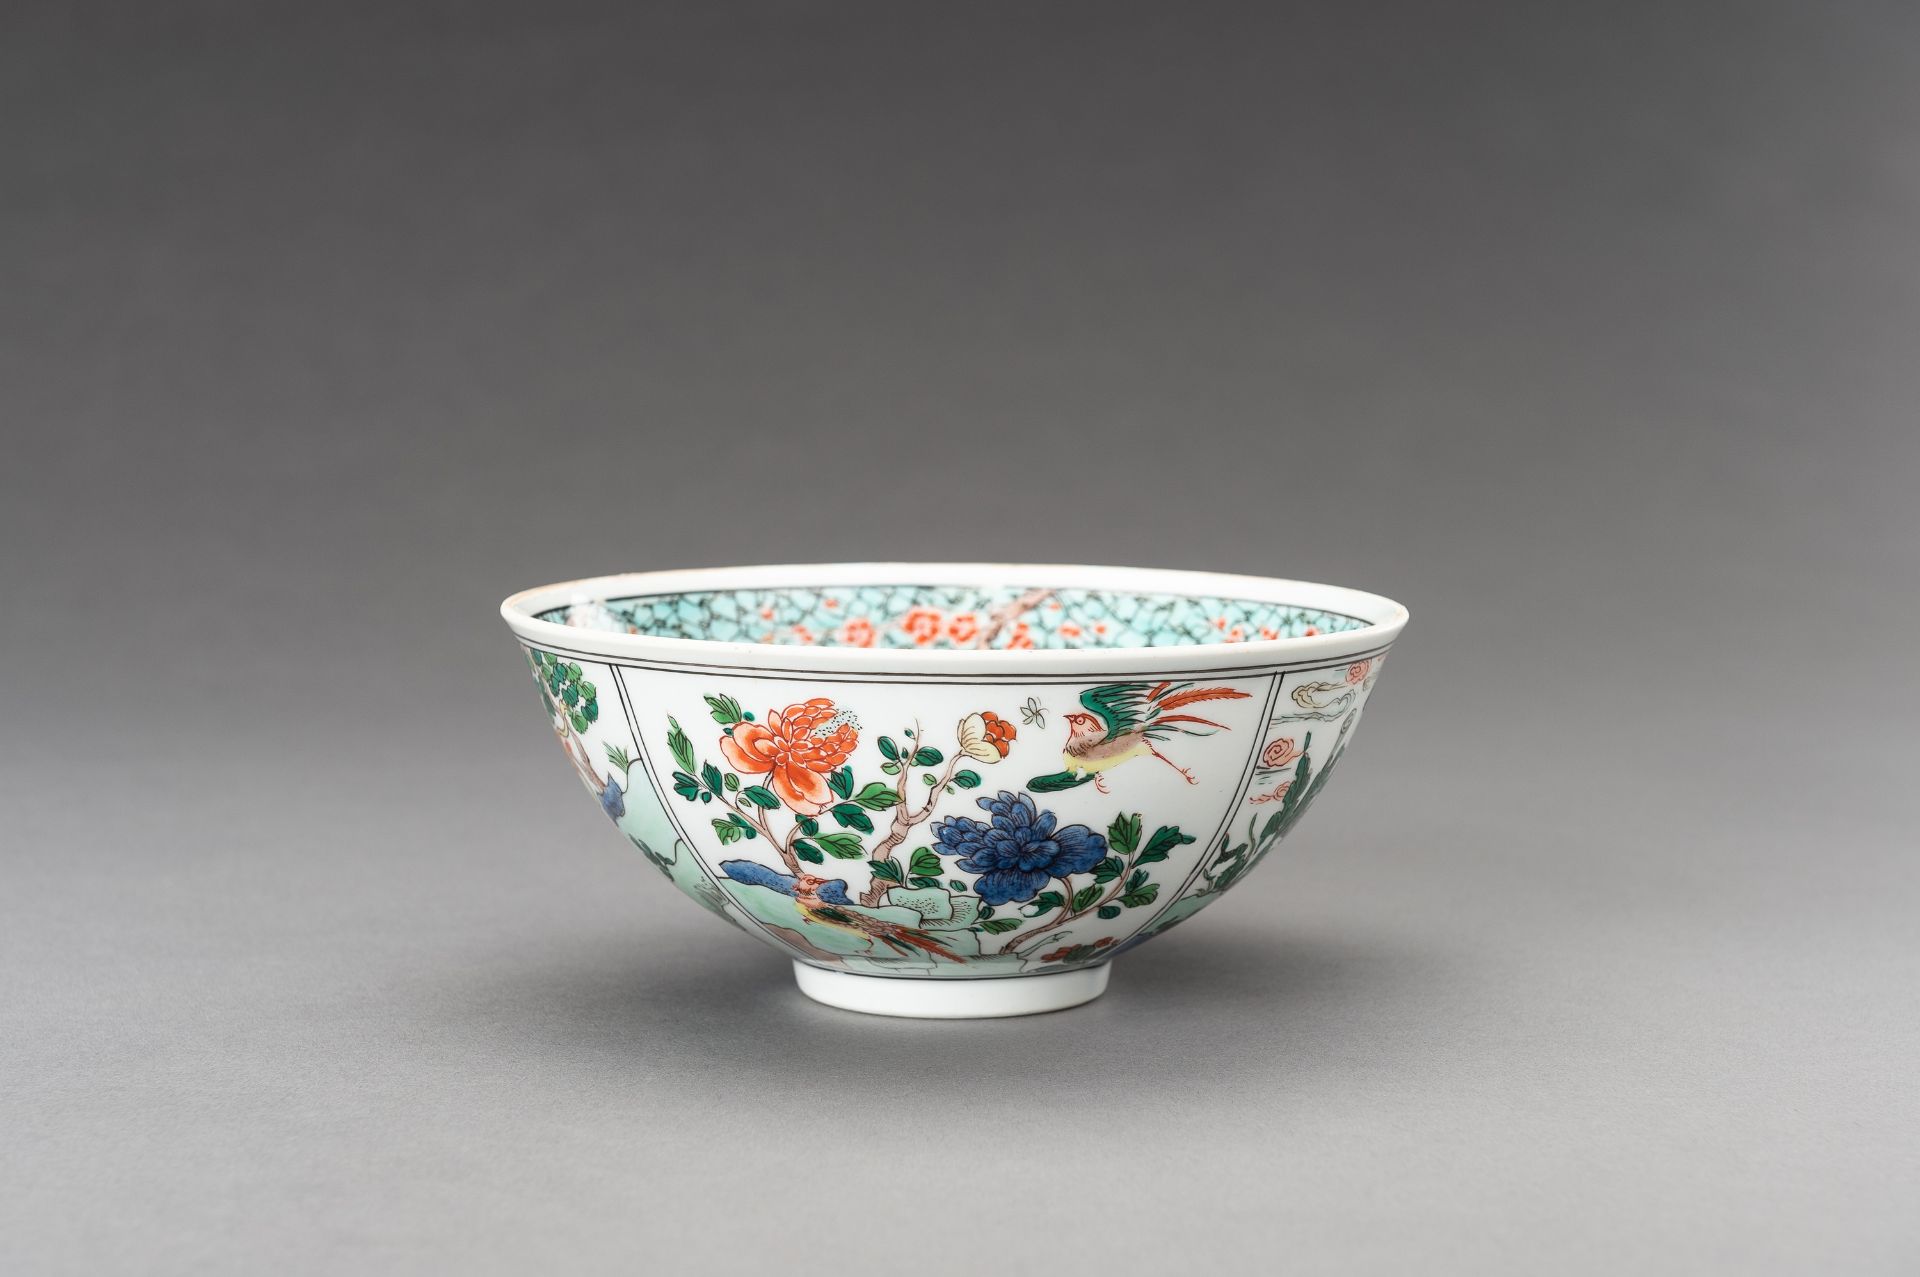 A SAMSON-STYLE COMPANY CHINOISERIE 'MYTHICAL CREATURES' PORCELAIN BOWL - Image 4 of 16